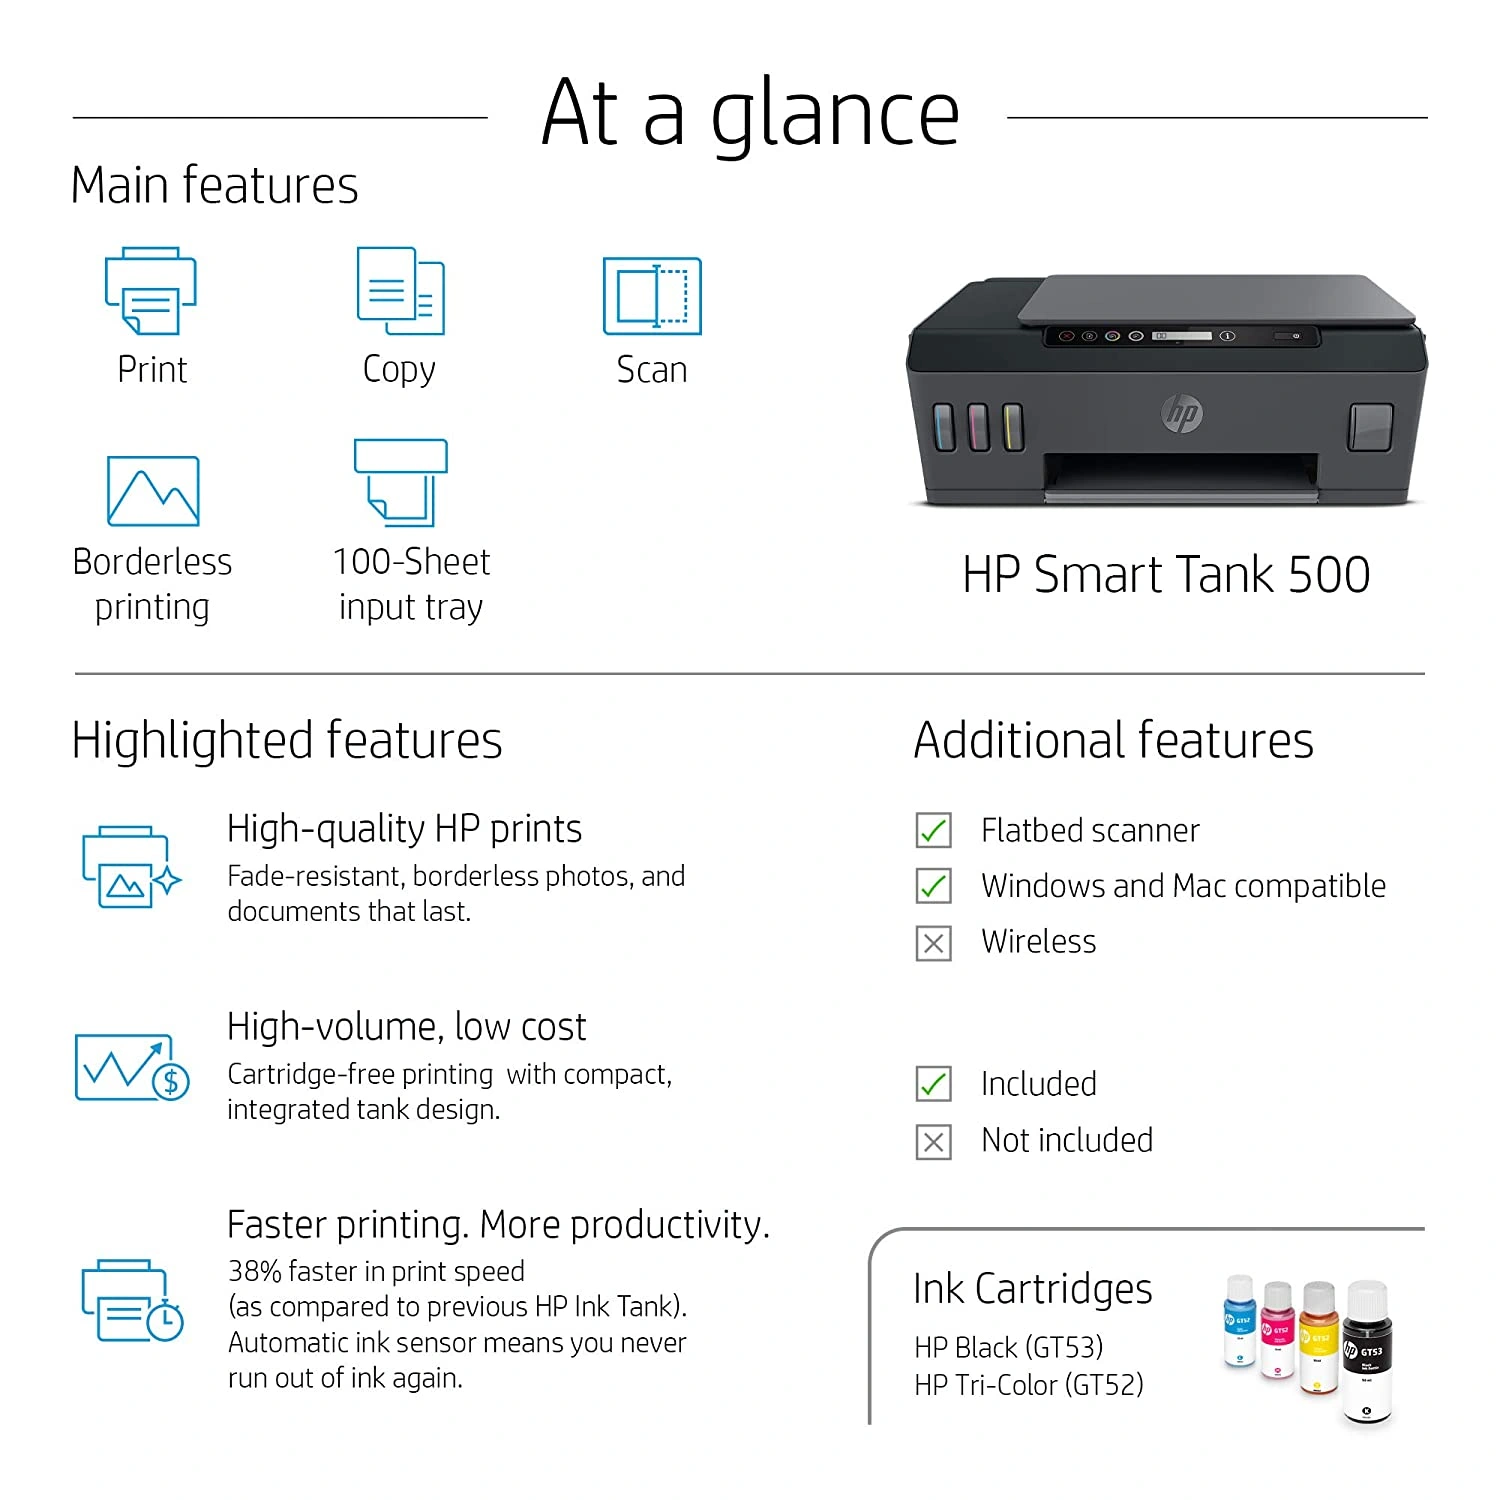 HP   /  Smart    Tank  500  /  All -in -One /  print  /  scan  / copy-2